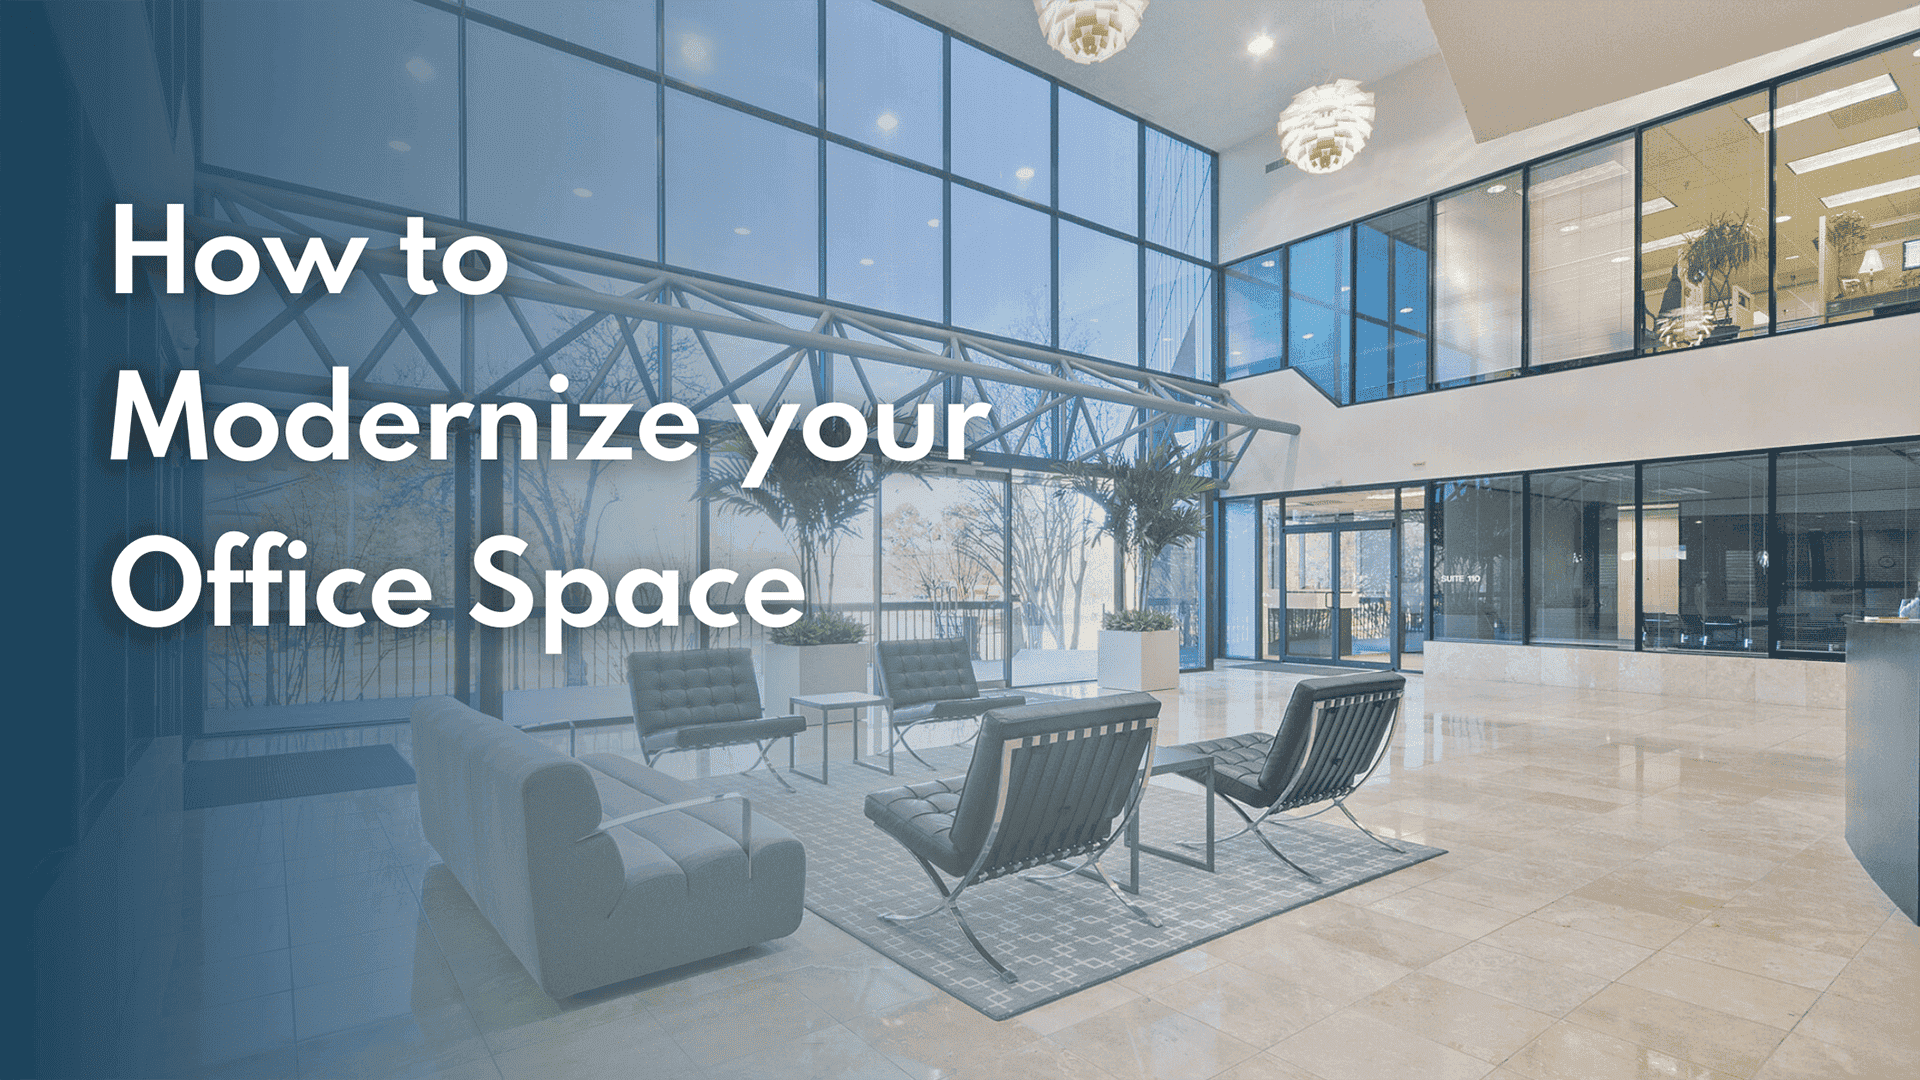 How to Modernize Office Space: 20+ Tips for a Modern Workspace